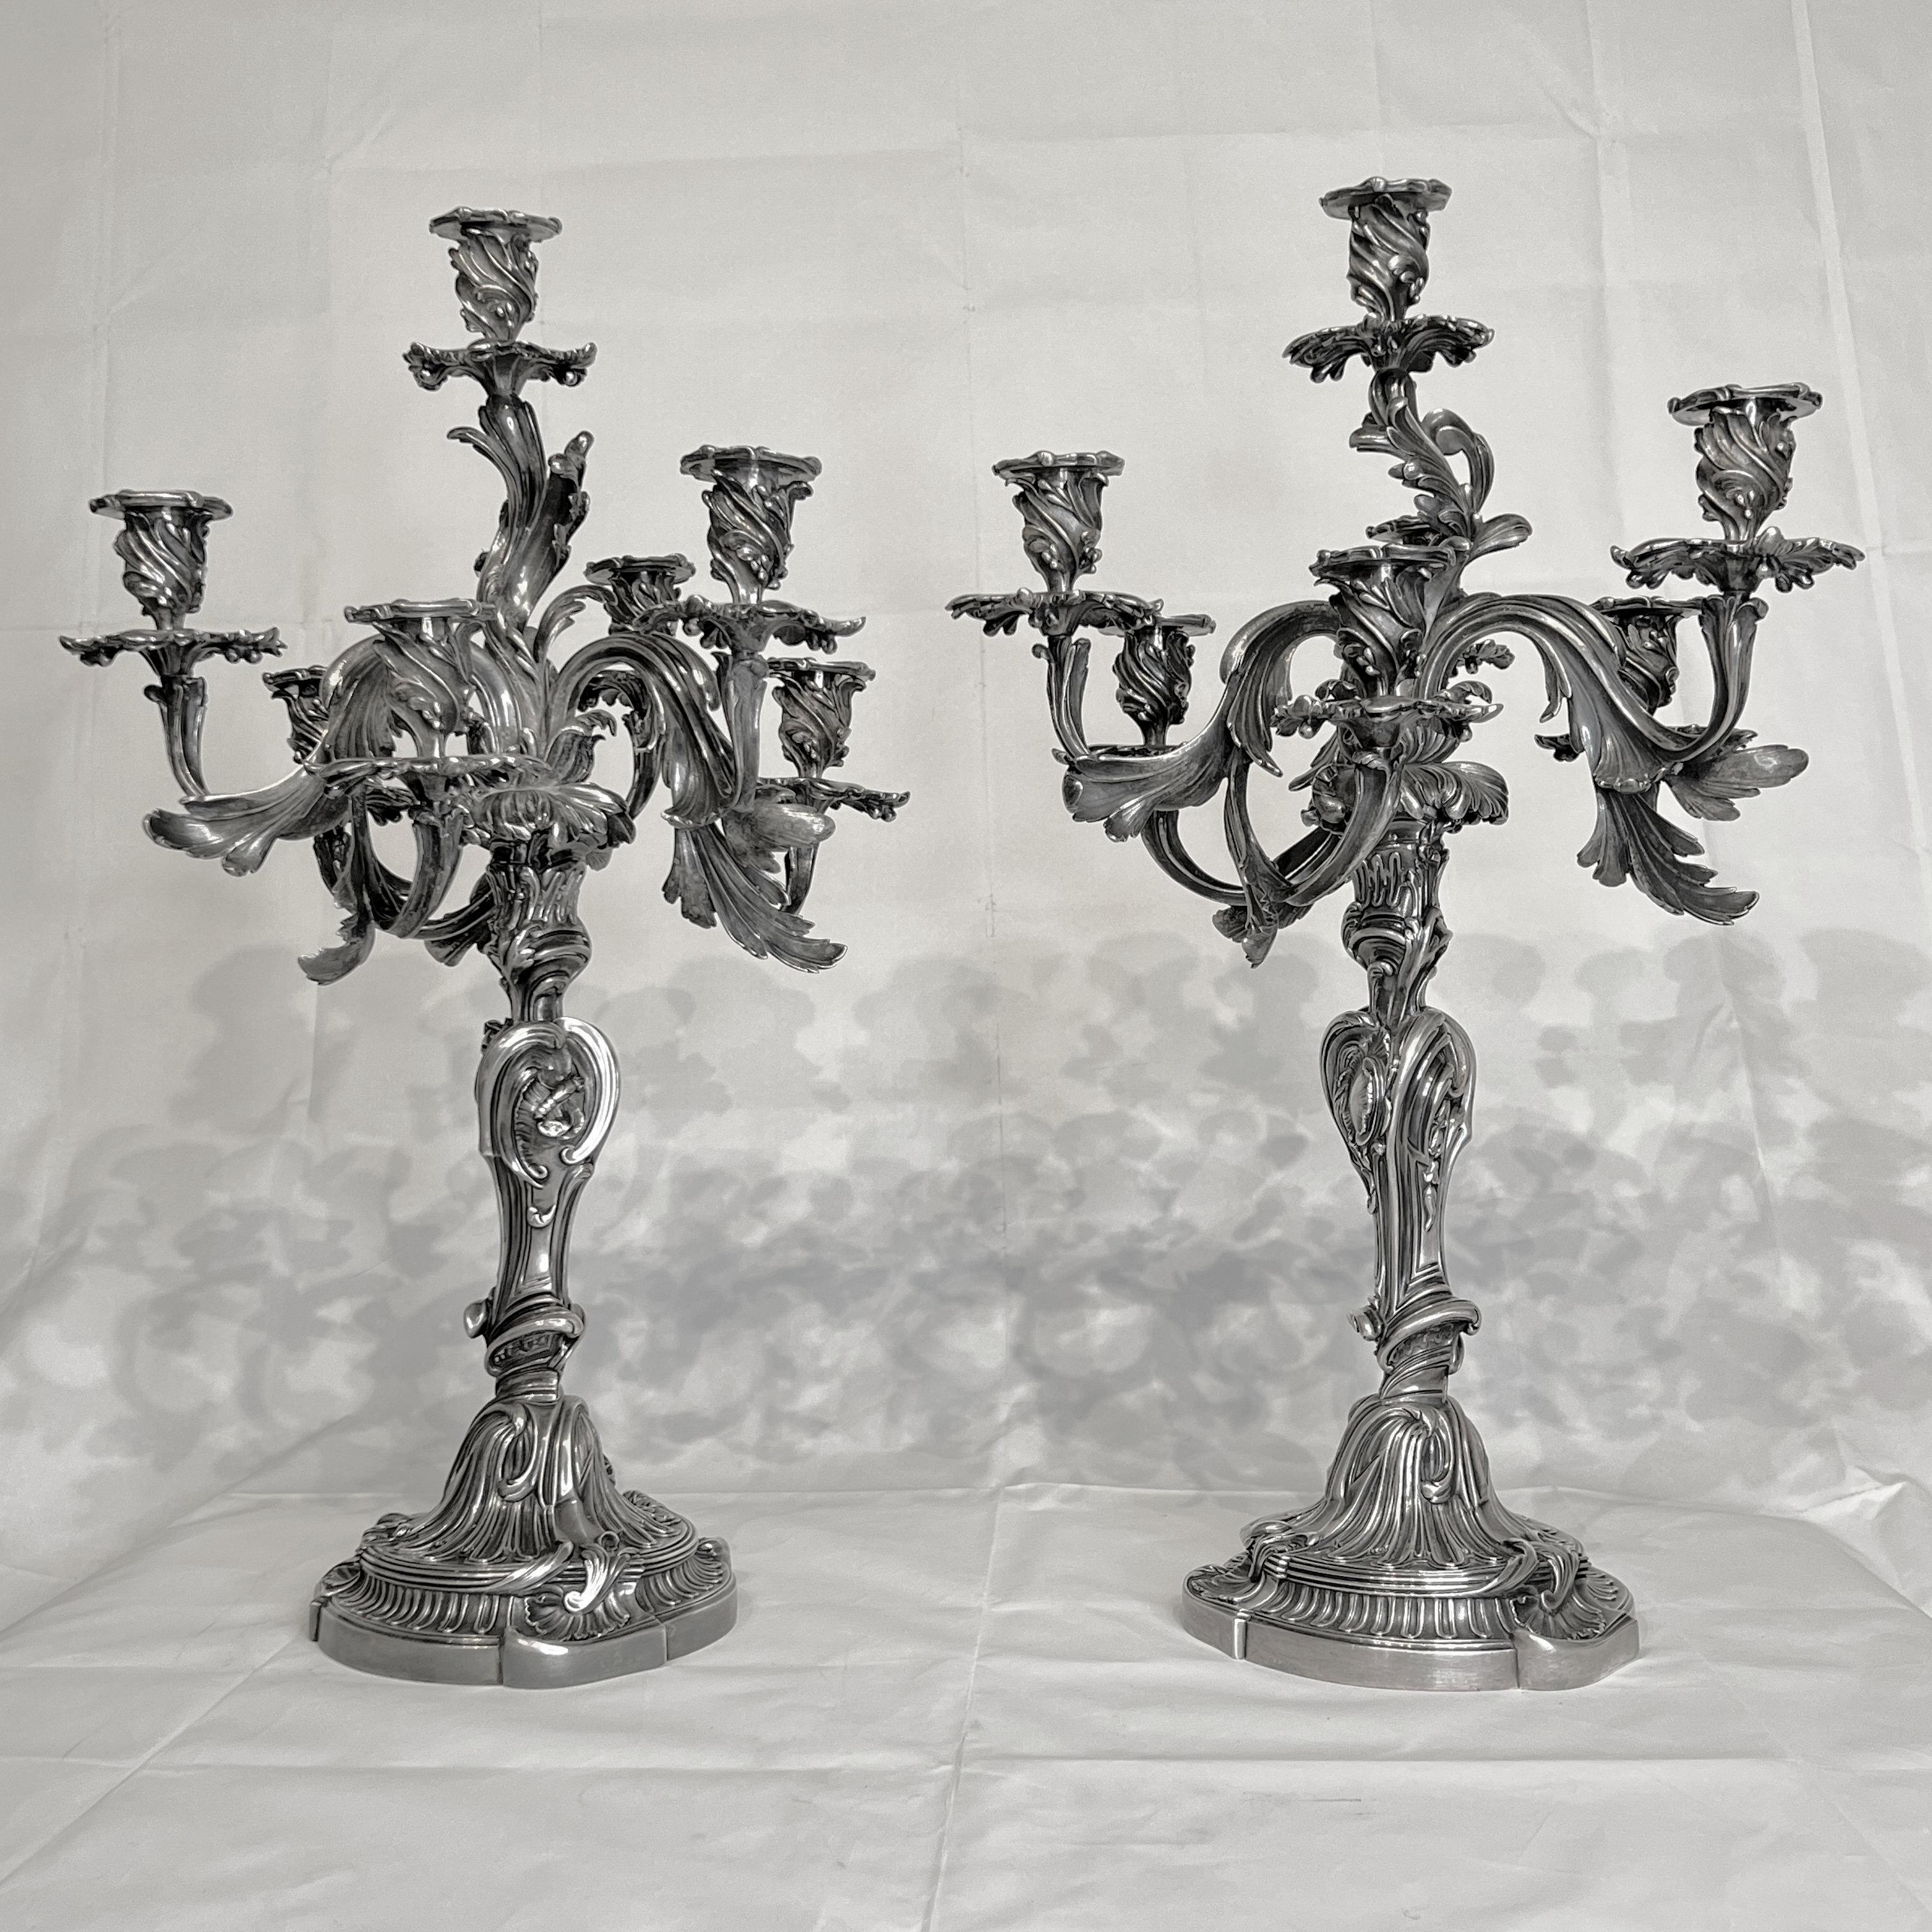 Silvered bronze candelabra in French Louis XV rococo style by Eugene Hazart of Paris. Inscribed siganture, Eug. Hazart, Paris. Casting of the finest quality.